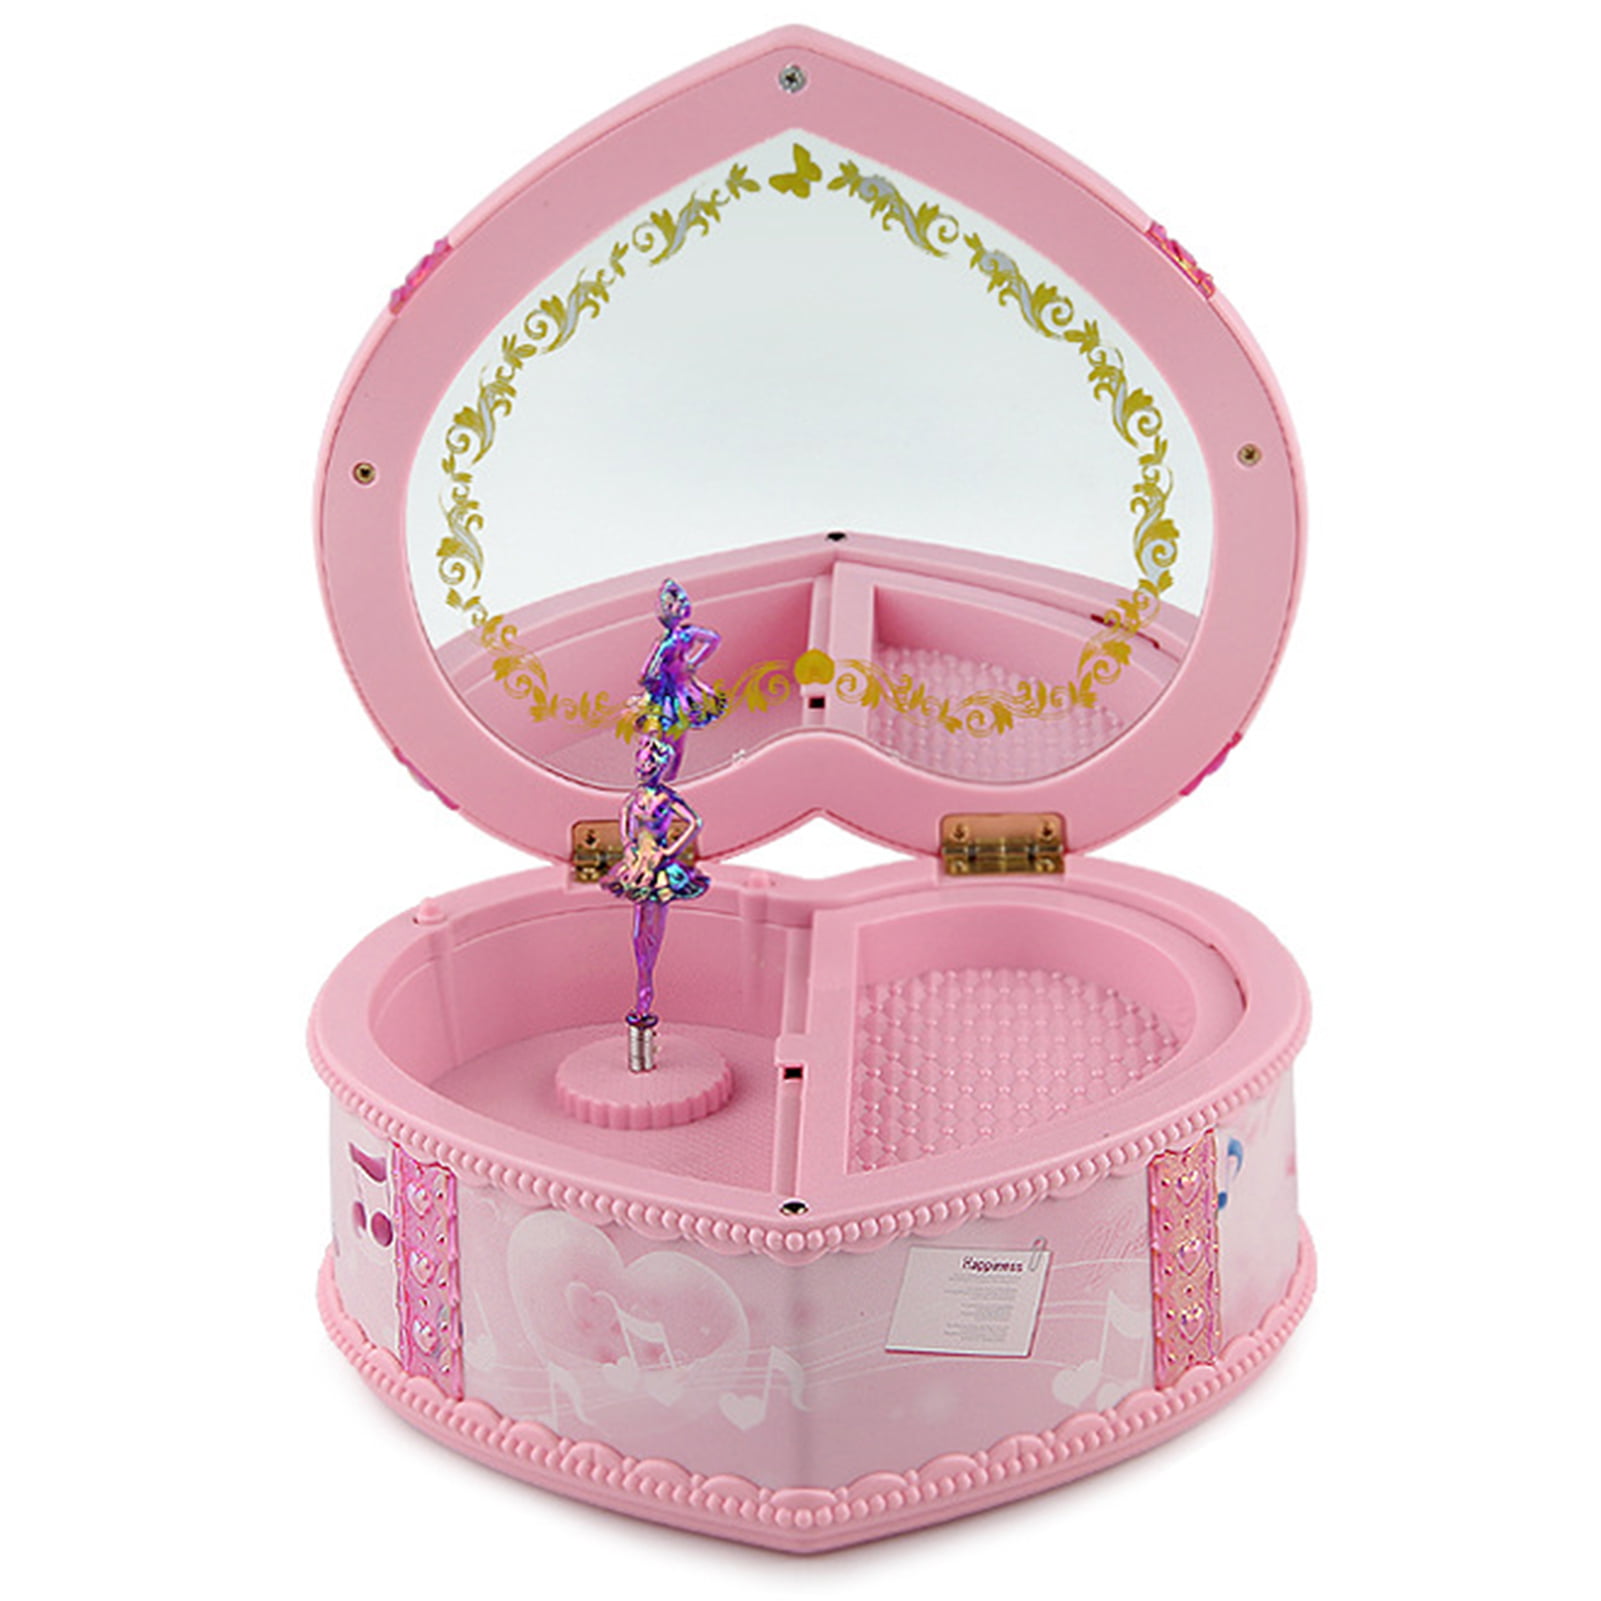 Details about   Christmas gift for a girl Ballerina Musical Jewelry Box with Pullout Drawer Pink 